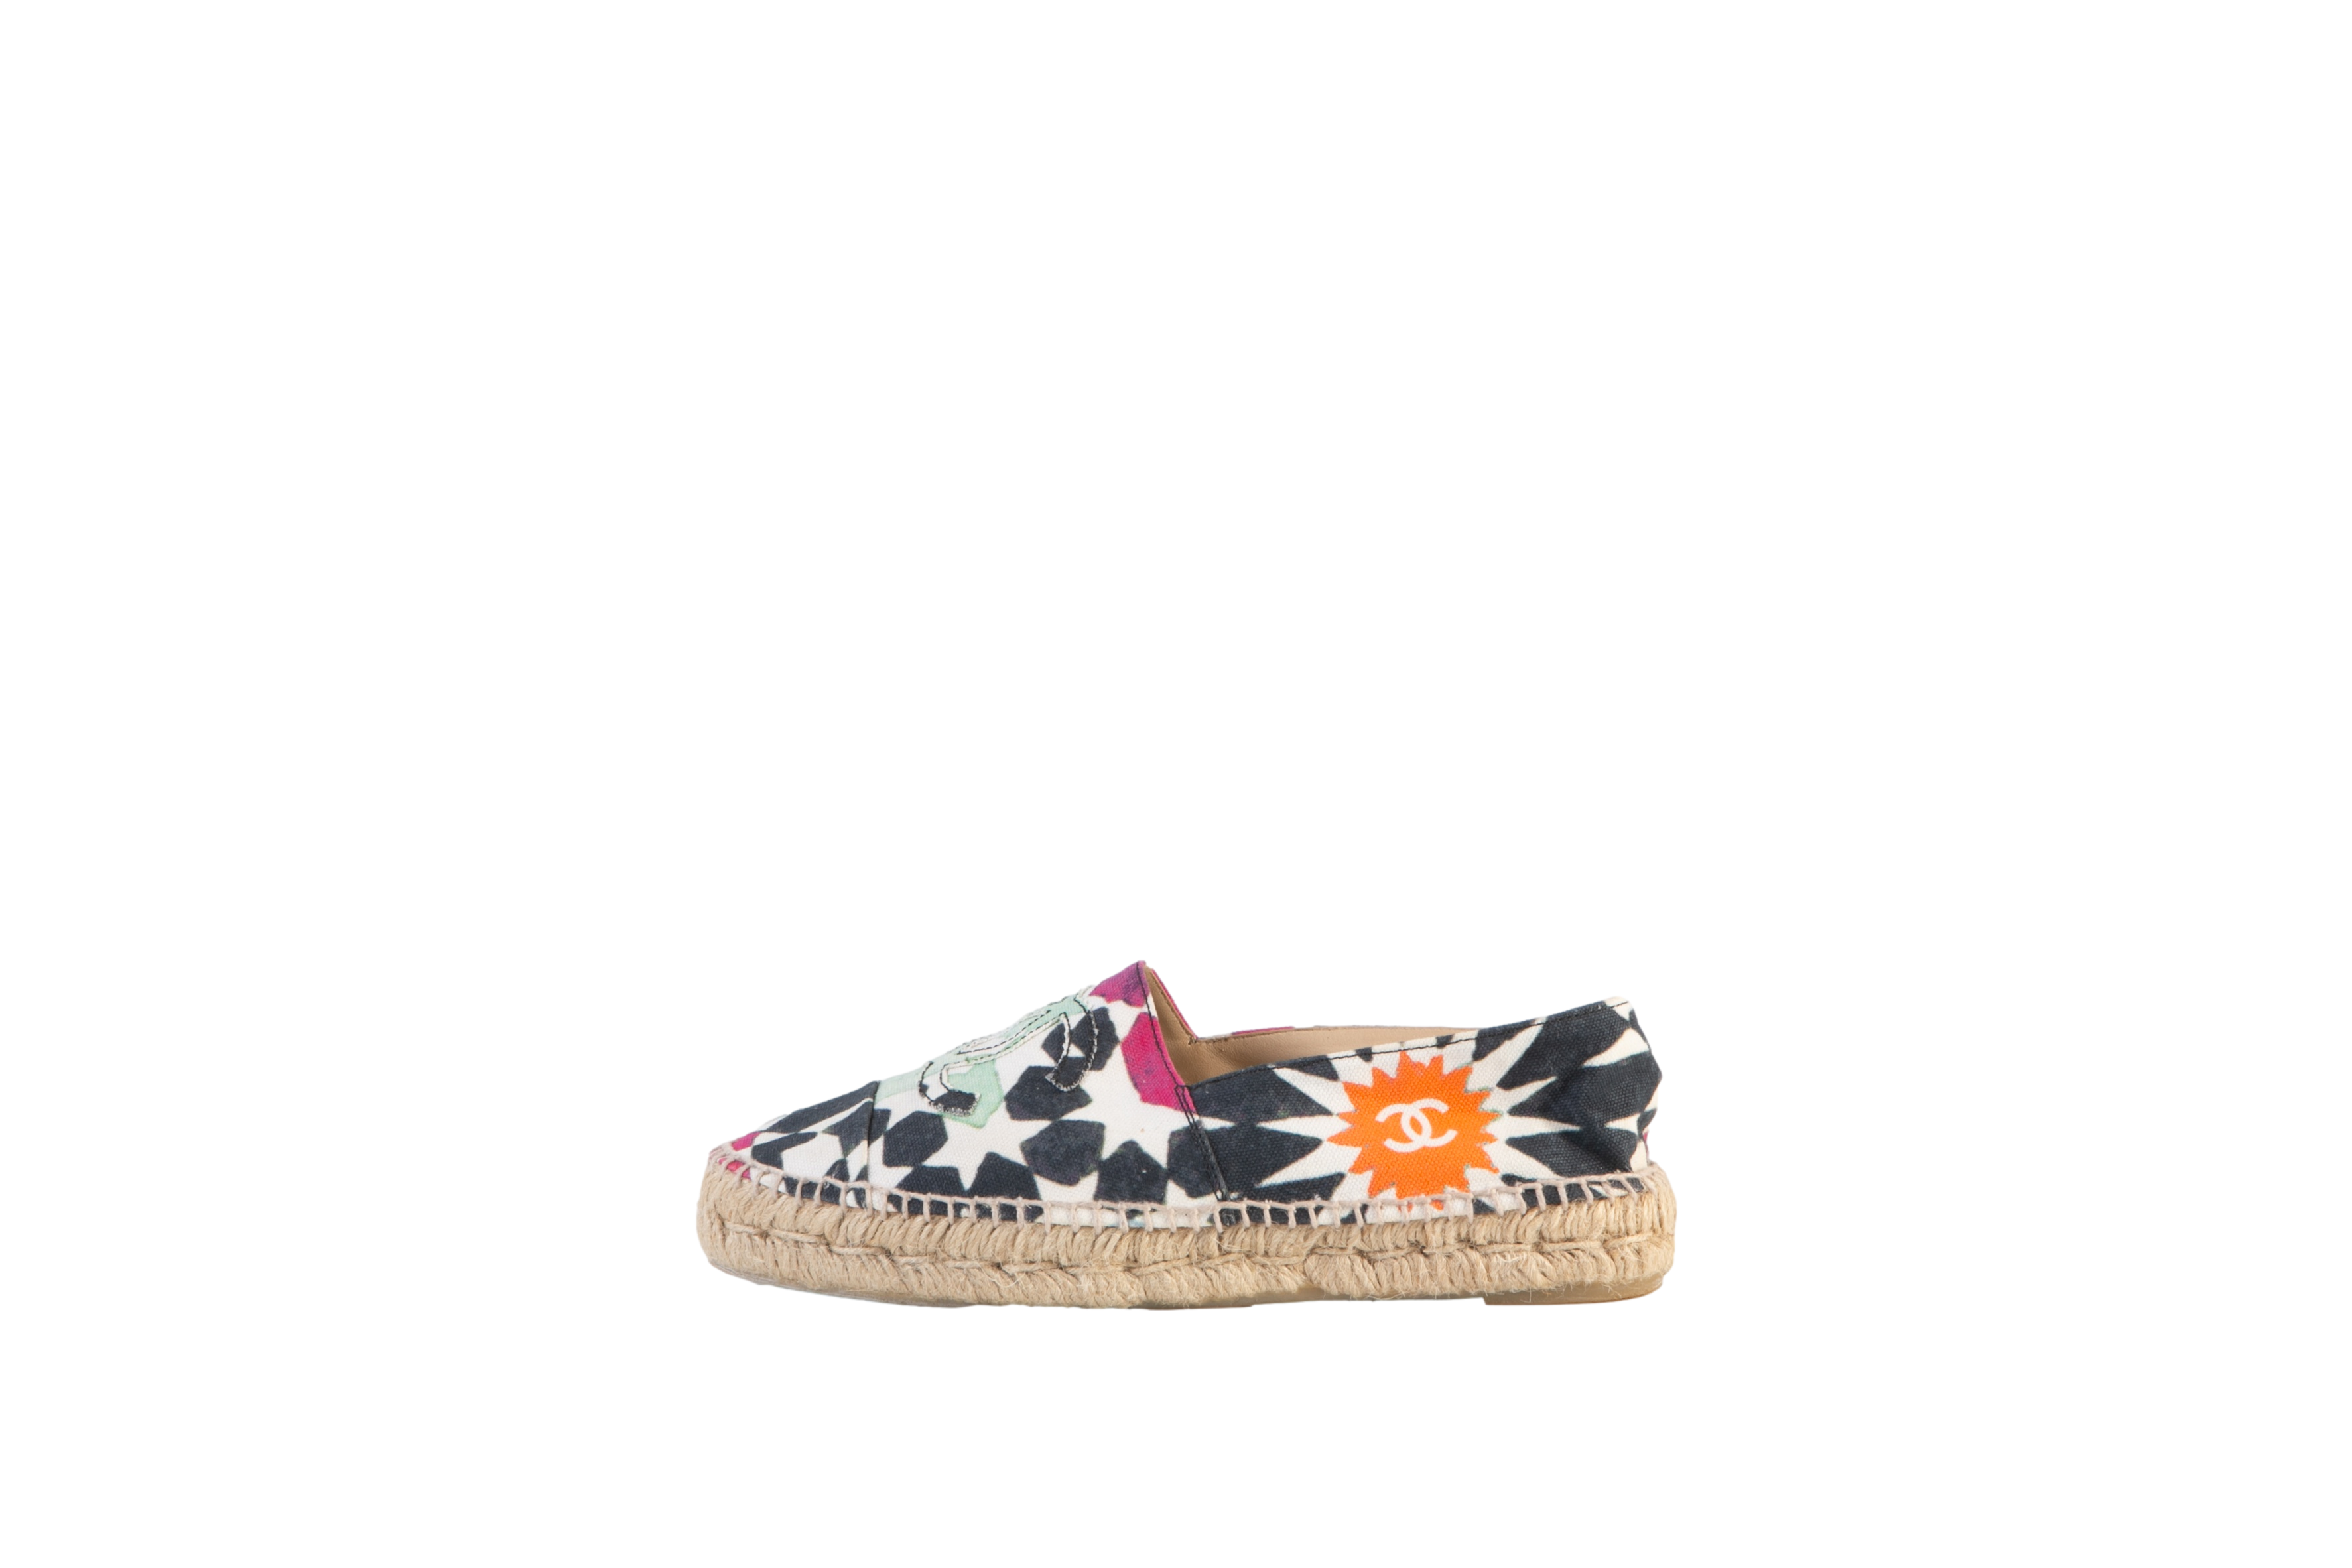 DESAPEGO THASSIA NAVES CHANEL ESPADRILLE COLORS